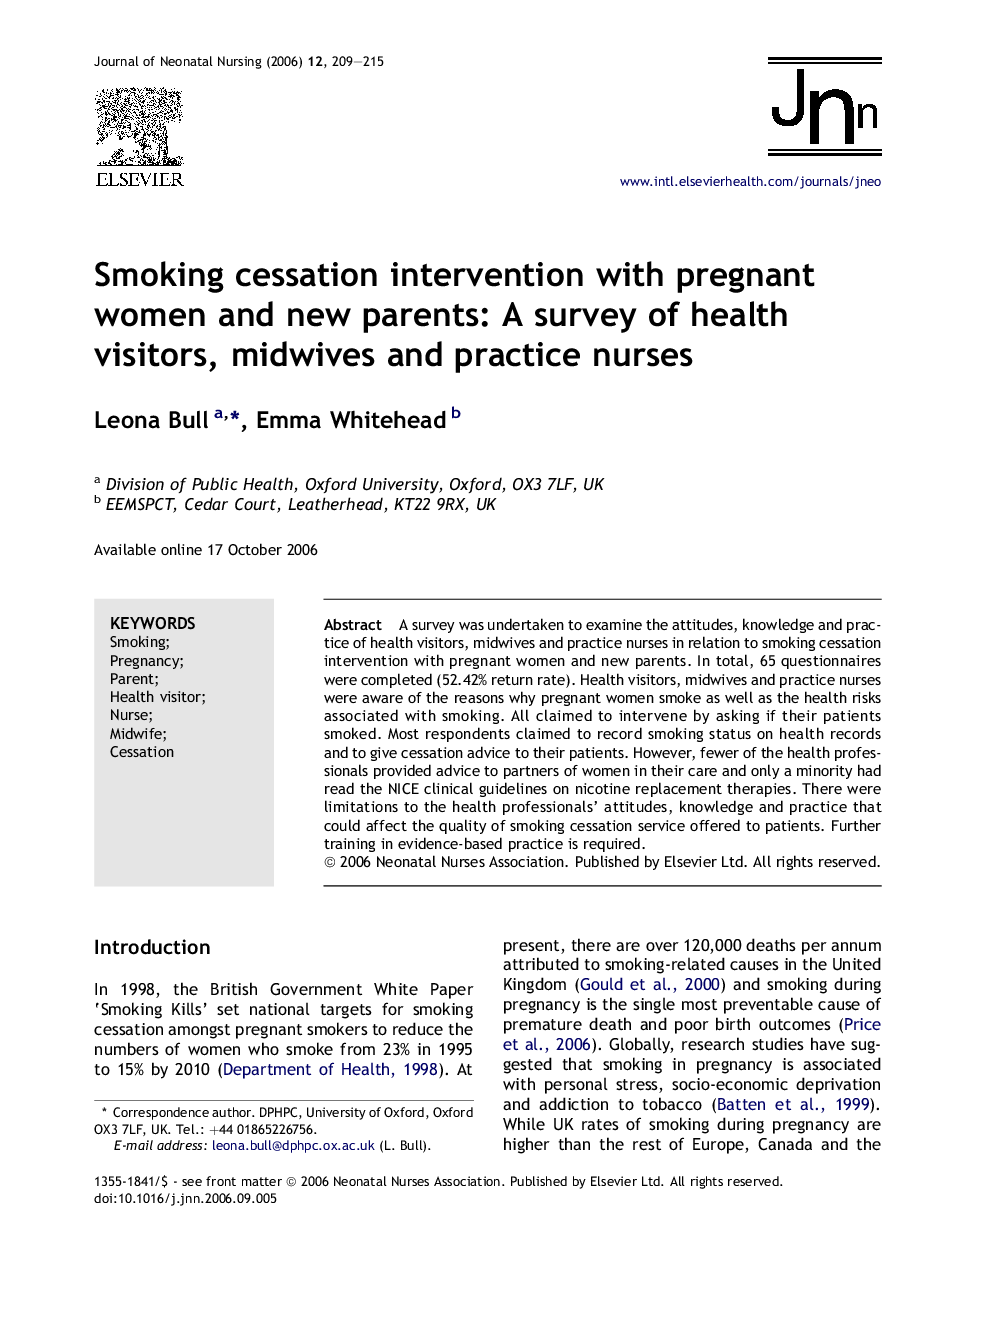 Smoking cessation intervention with pregnant women and new parents: A survey of health visitors, midwives and practice nurses